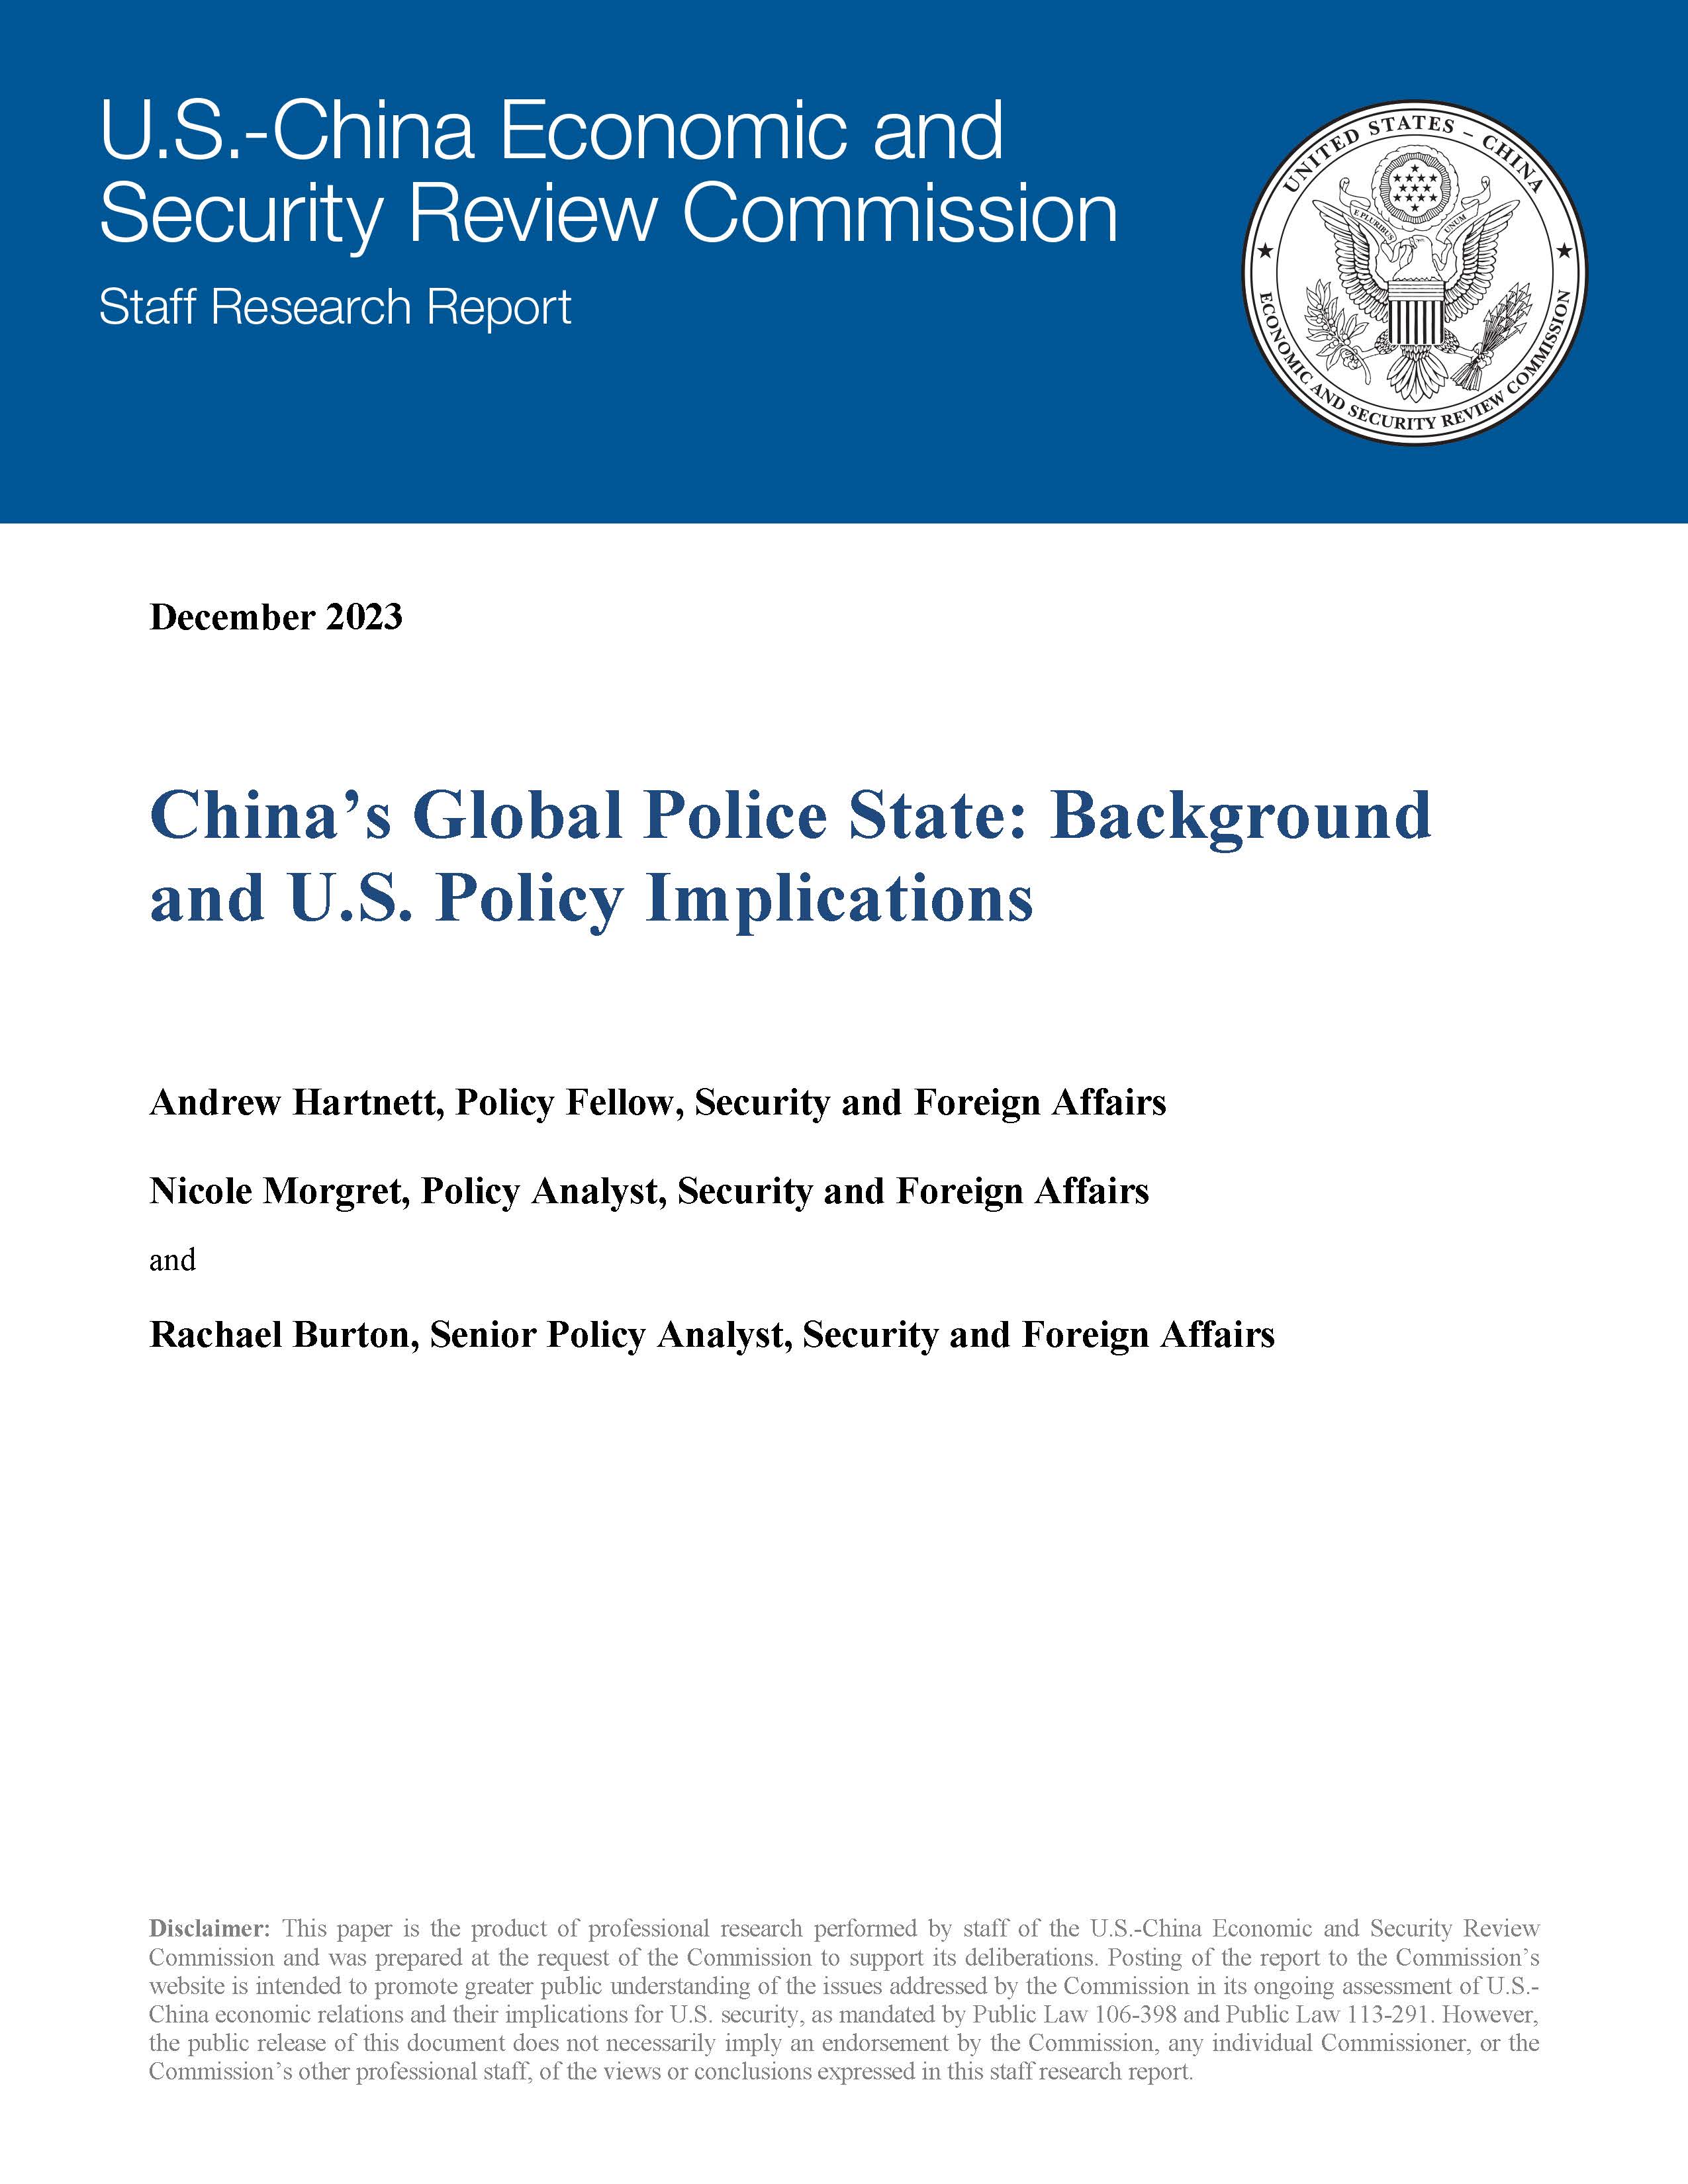 China's Global Police State